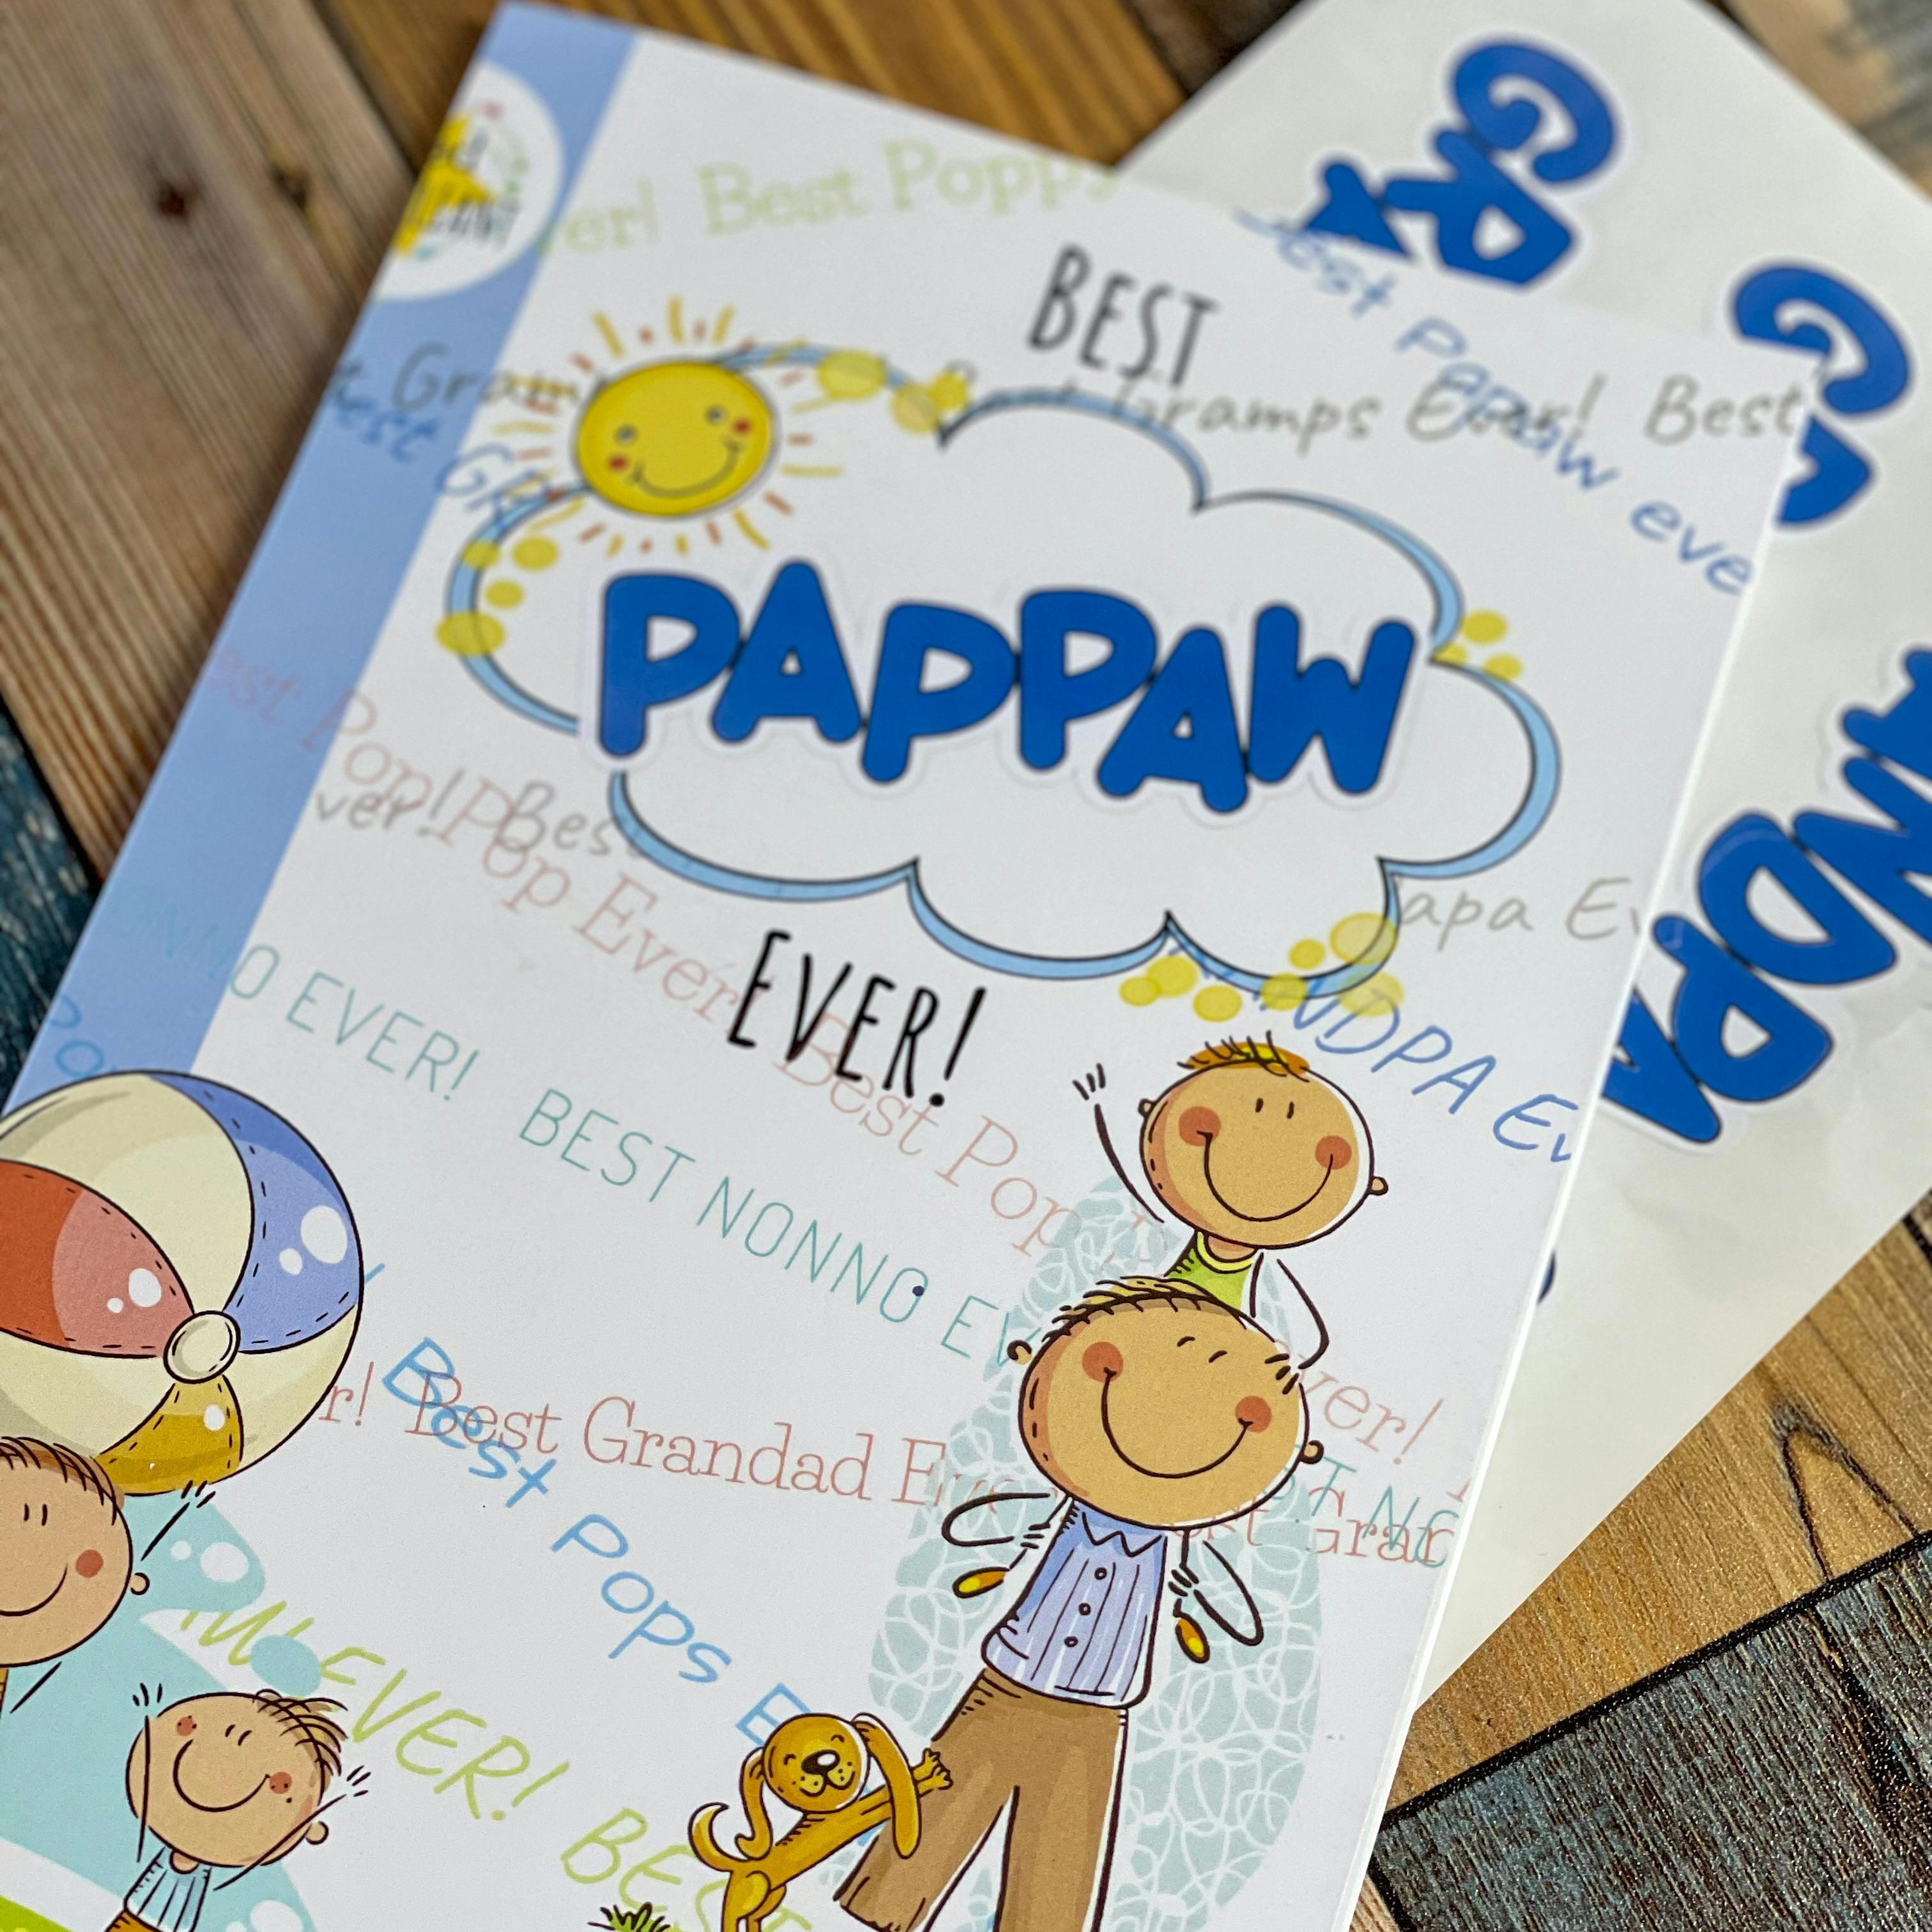 Beat Grandpa Ever book from kids w/name stickers